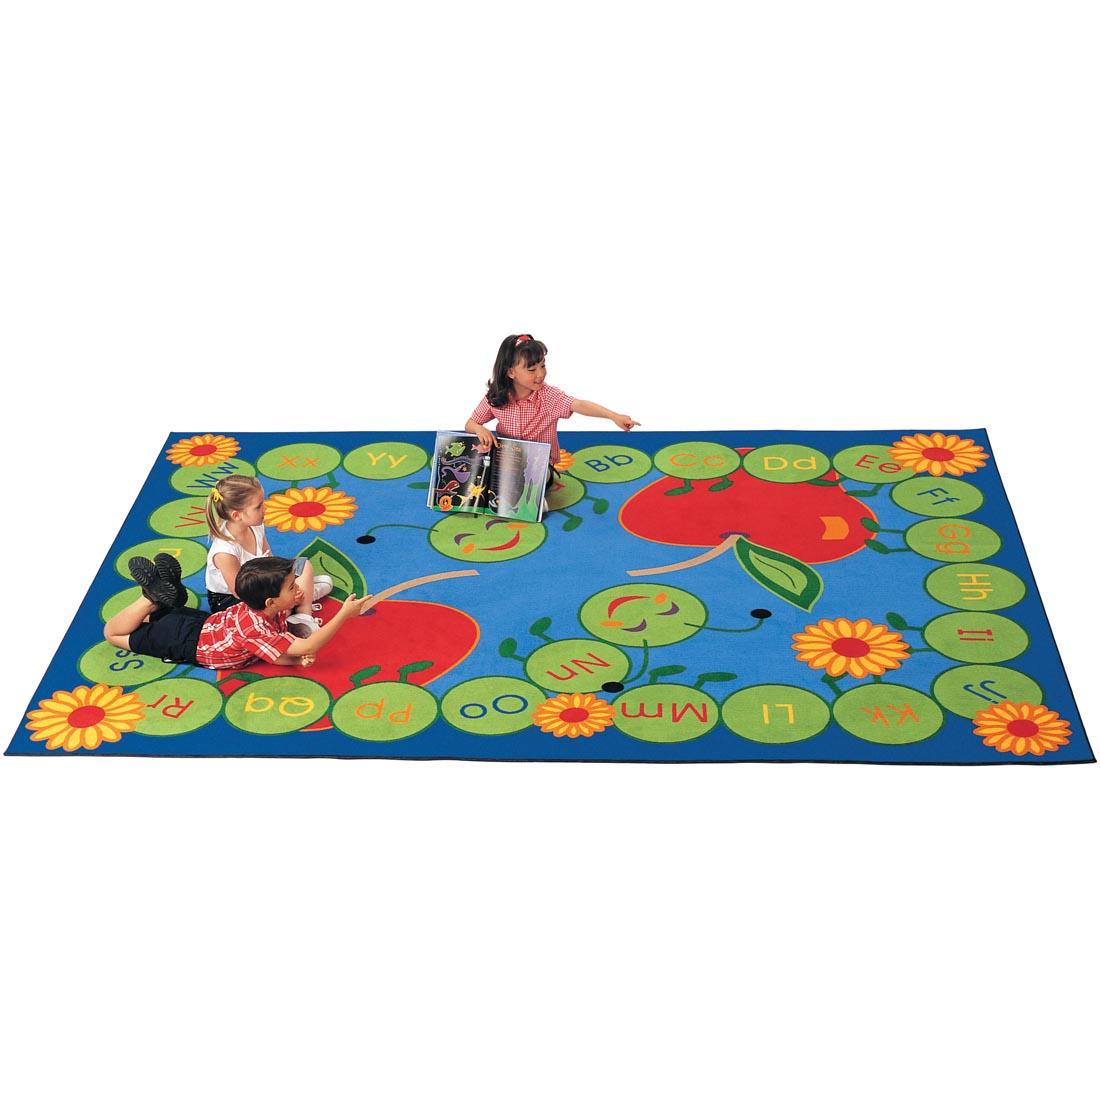 Children sitting and laying on the ABC Caterpillar Rectangle Rug by Carpets For Kids